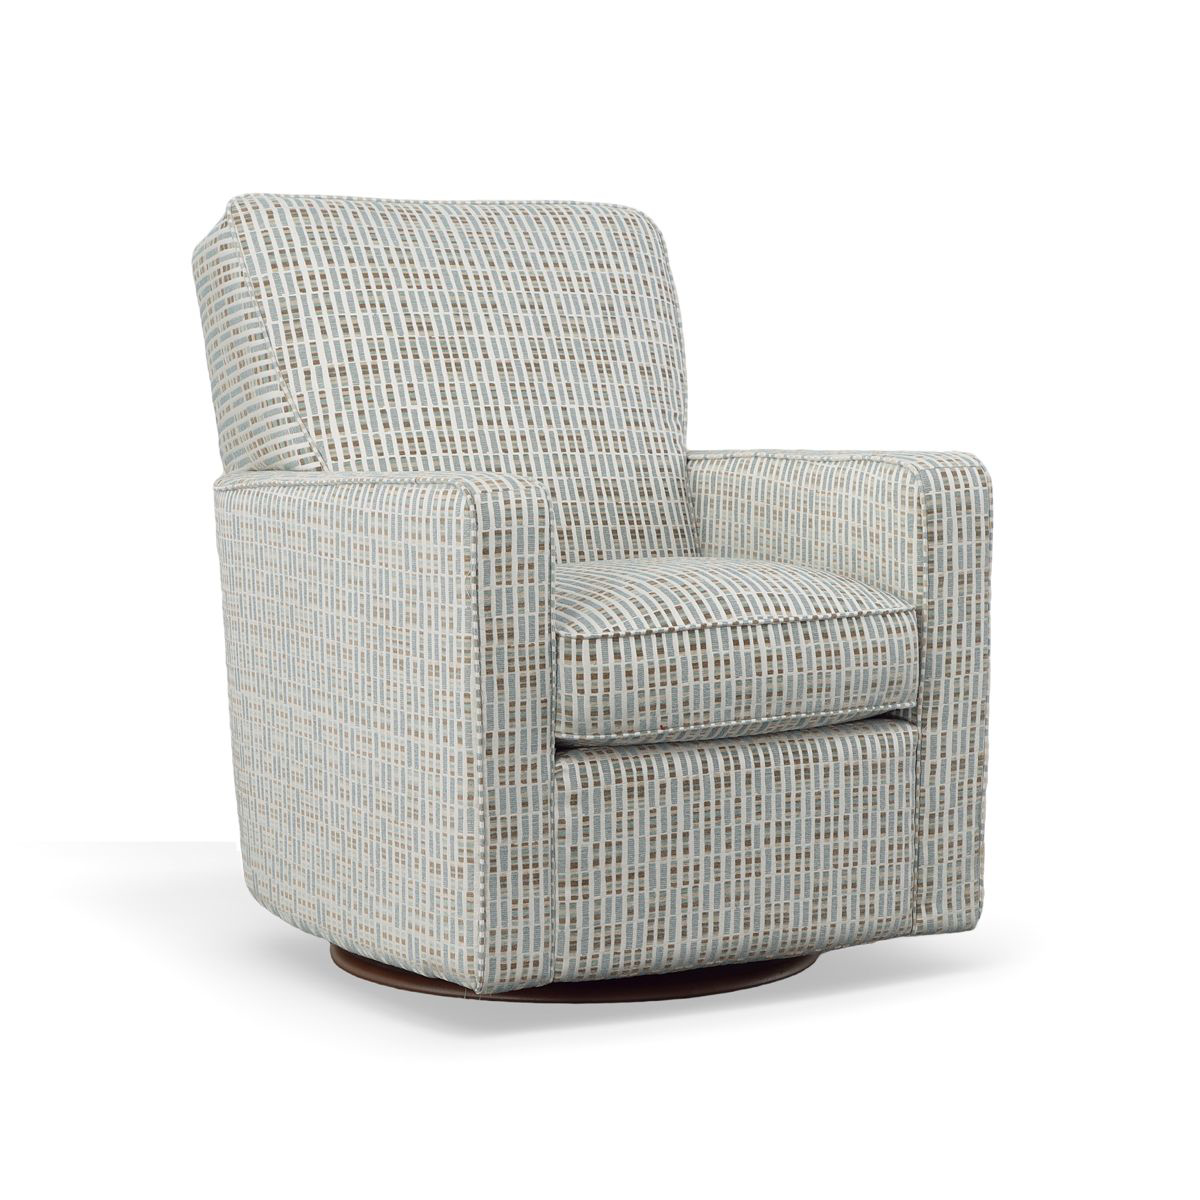 Picture of MIDTOWN SWIVEL GLIDER CHAIR